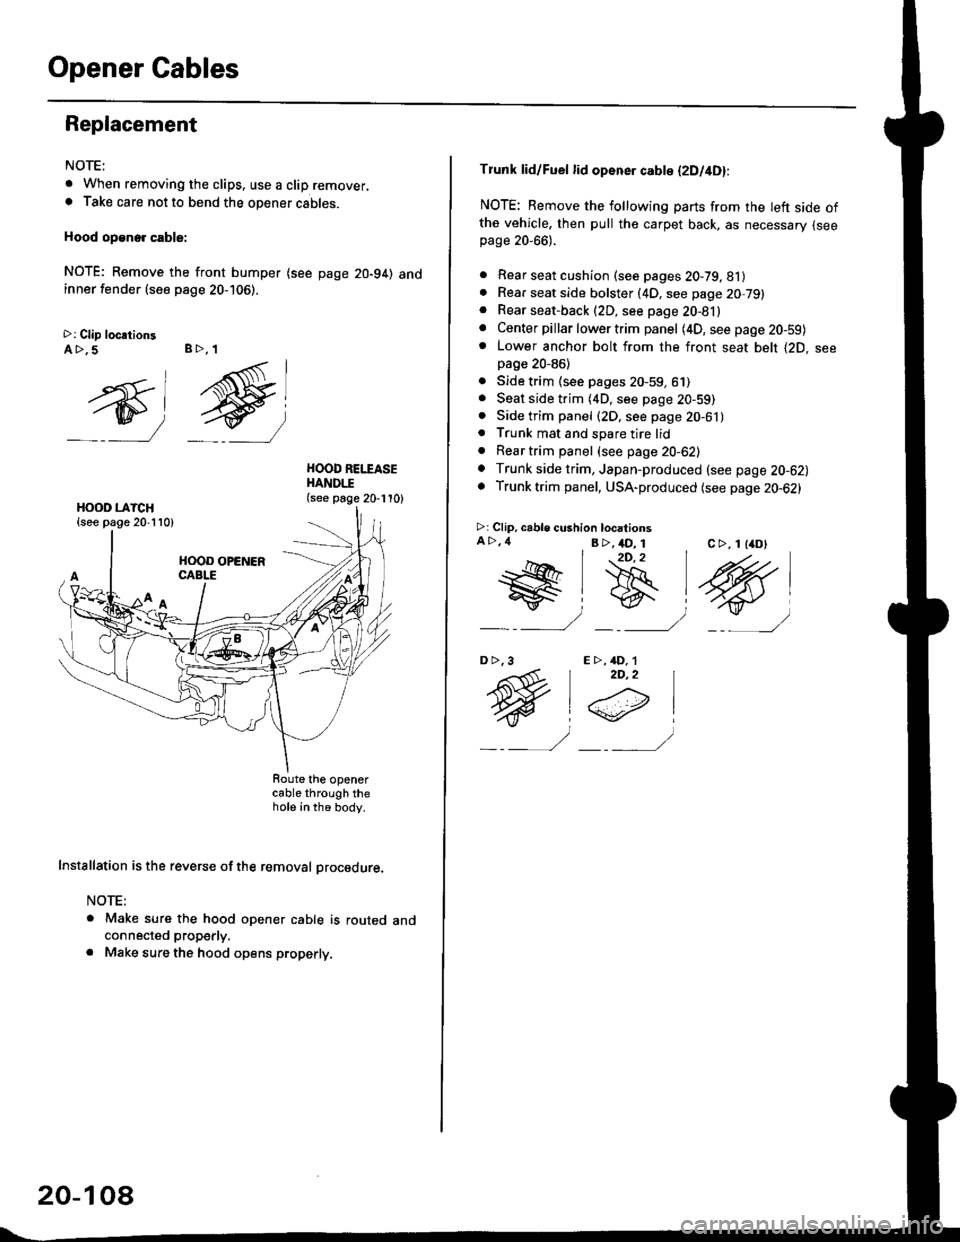 HONDA CIVIC 1996 6.G Workshop Manual Opener Cables
Replacement
NOTE:
t When removing the clips. use a clip remover.. Take care not to bend the opener cables.
Hood op€ne. cable:
NOTE; Remove the front bumper (see page 20-94) andinner fe